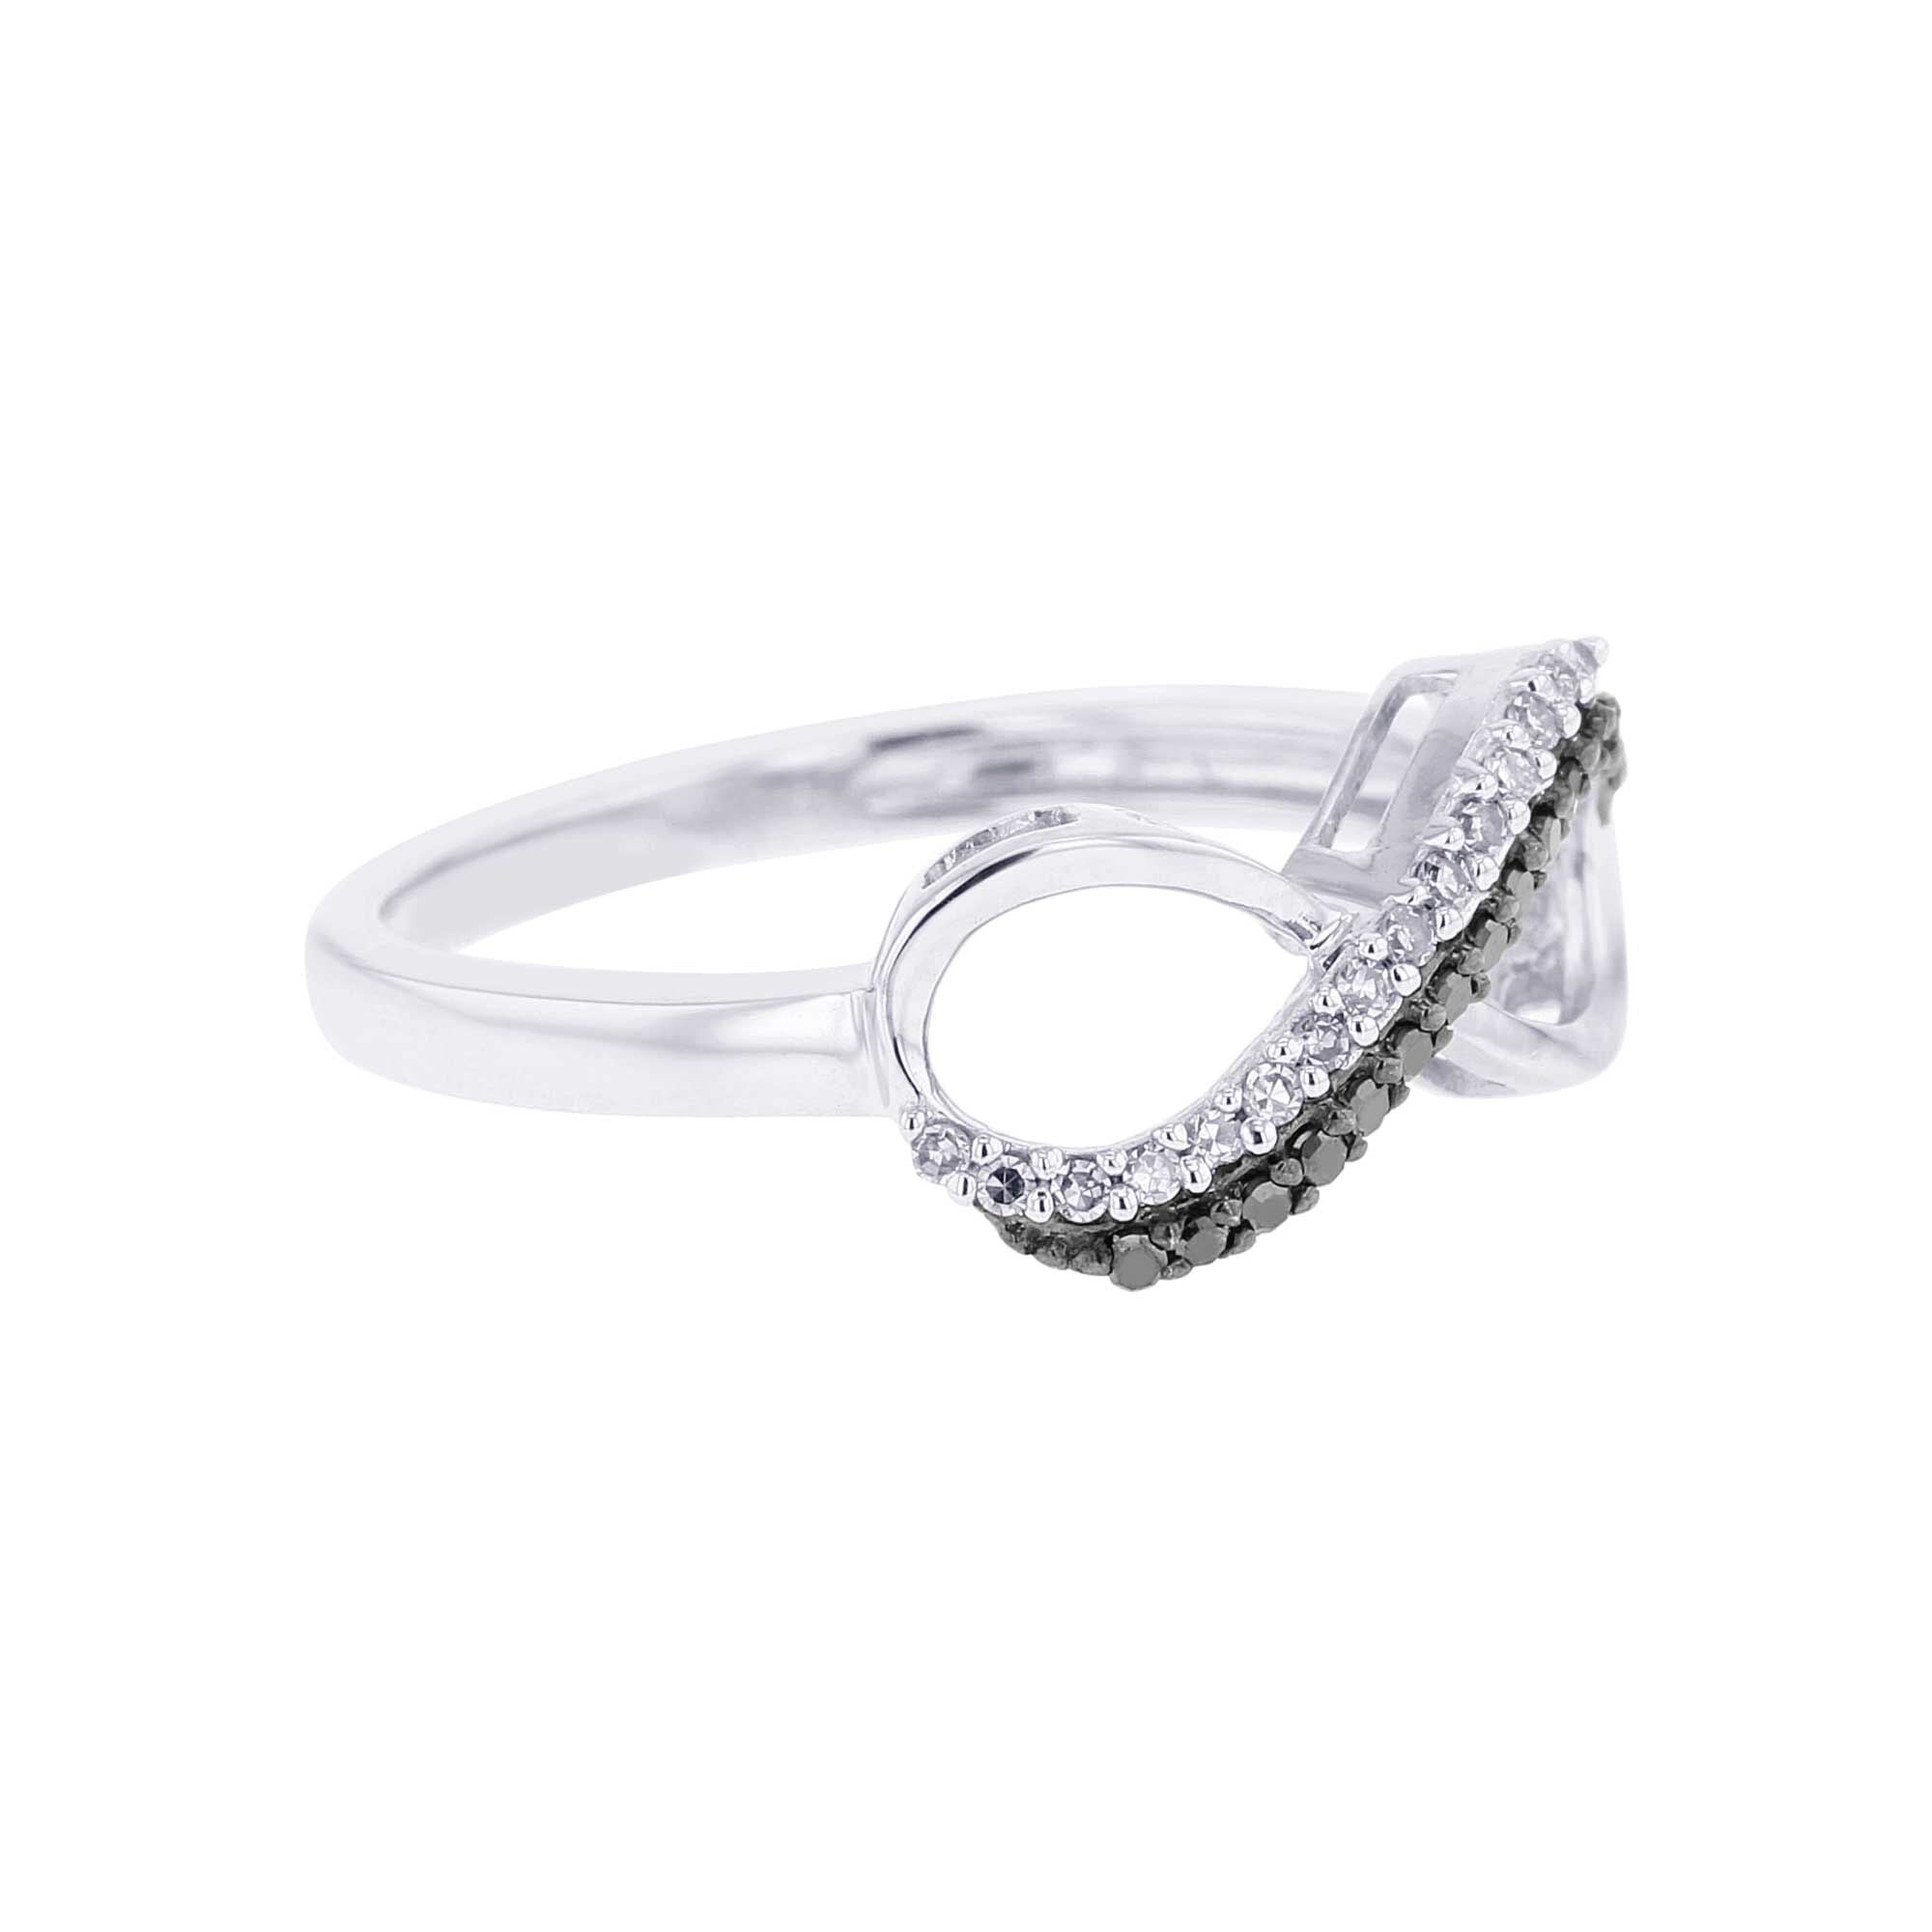 Shop Stunning Platinum Jewelry | Engagement Rings For Women |